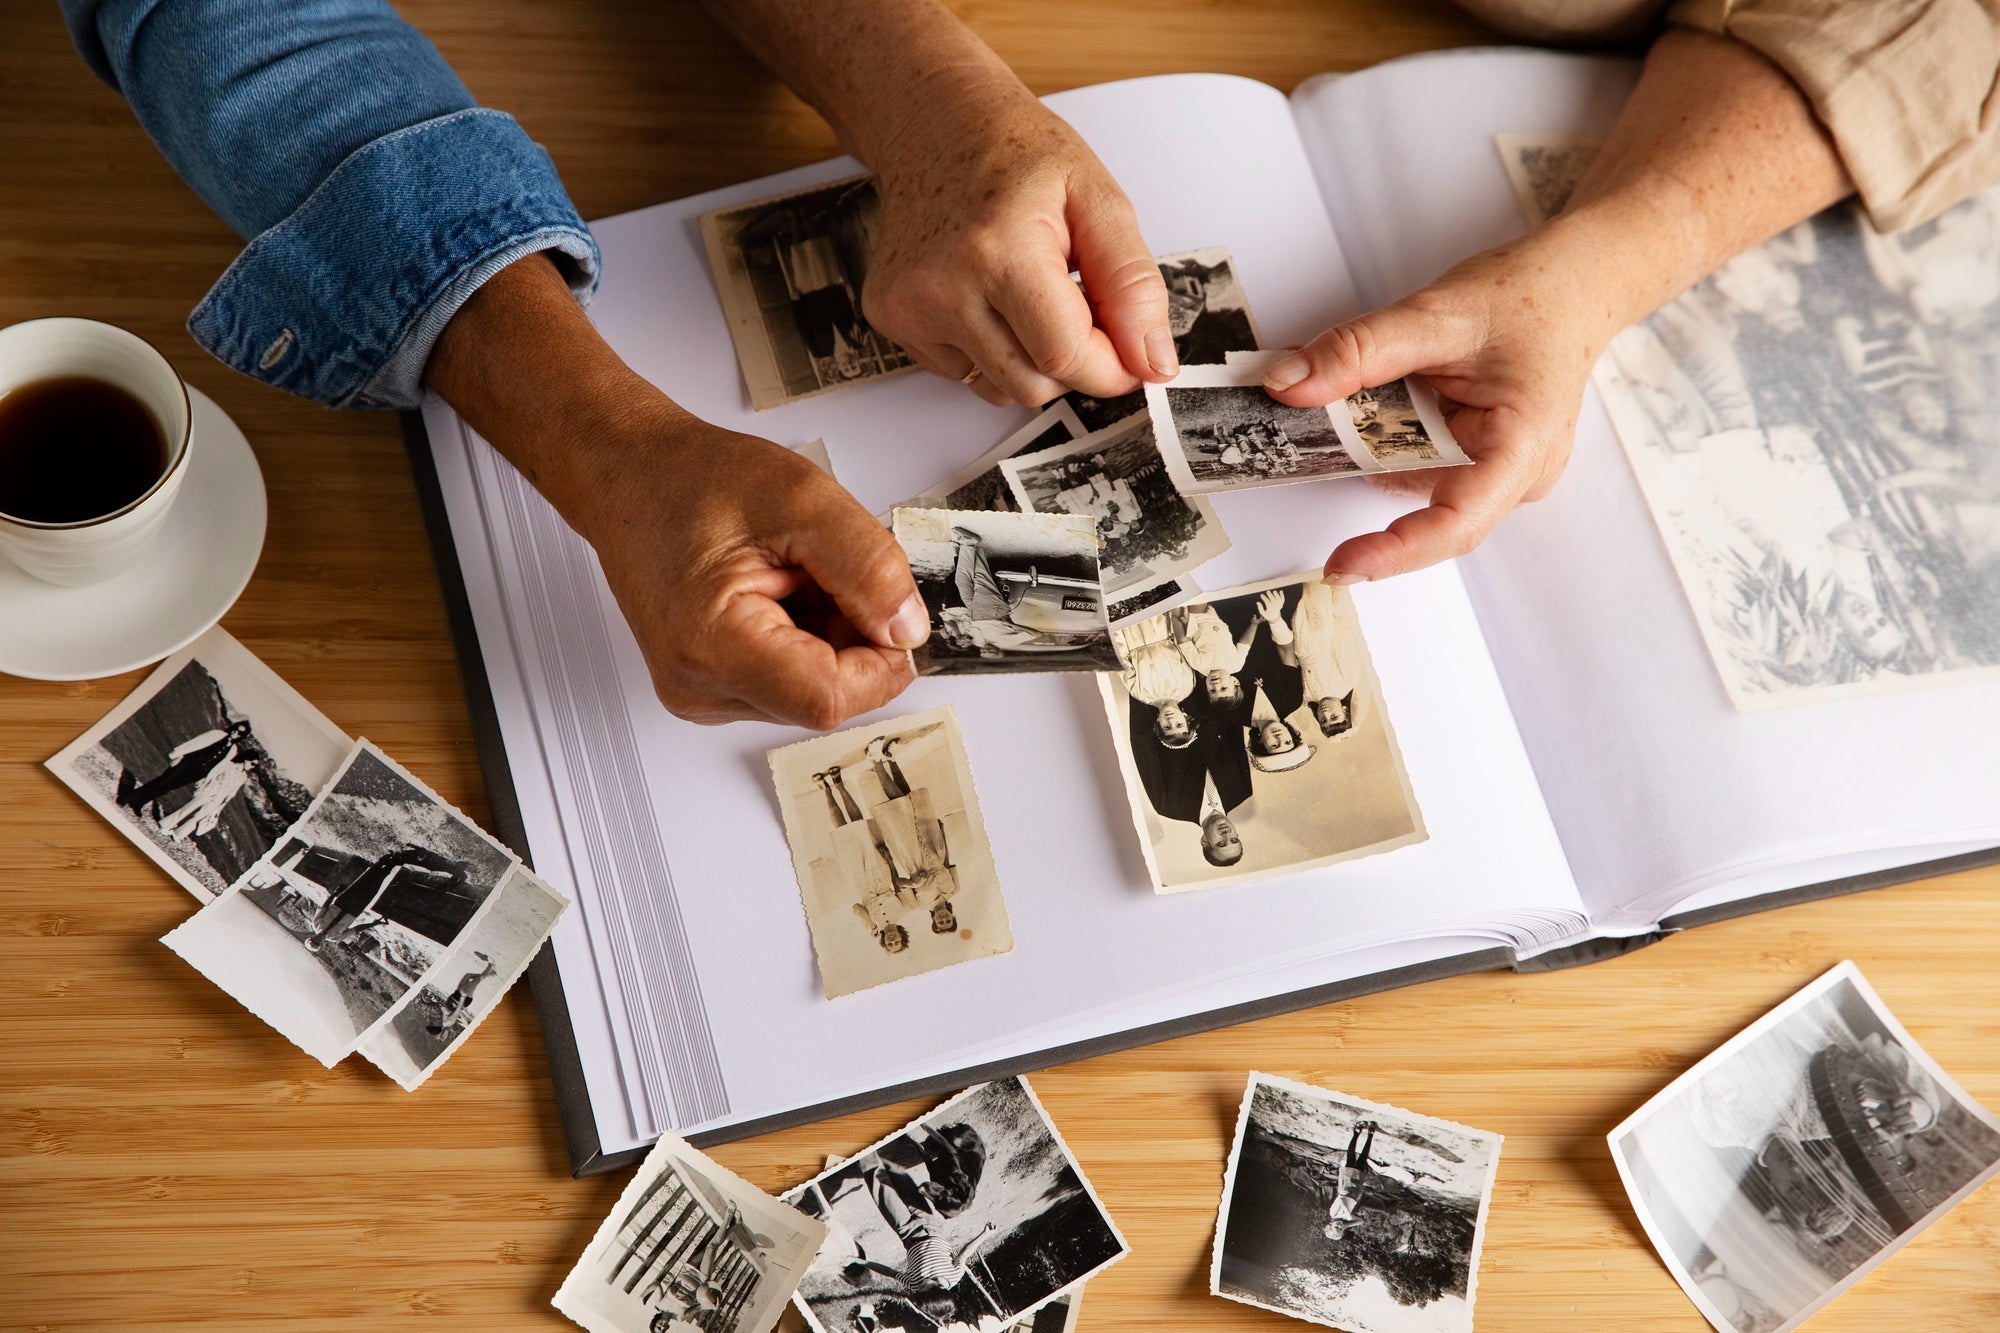 National Scrapbook Day (NSD) is a holiday that is observed every year on the first Saturday in May and was originally invented by Creative Memories in 1994.